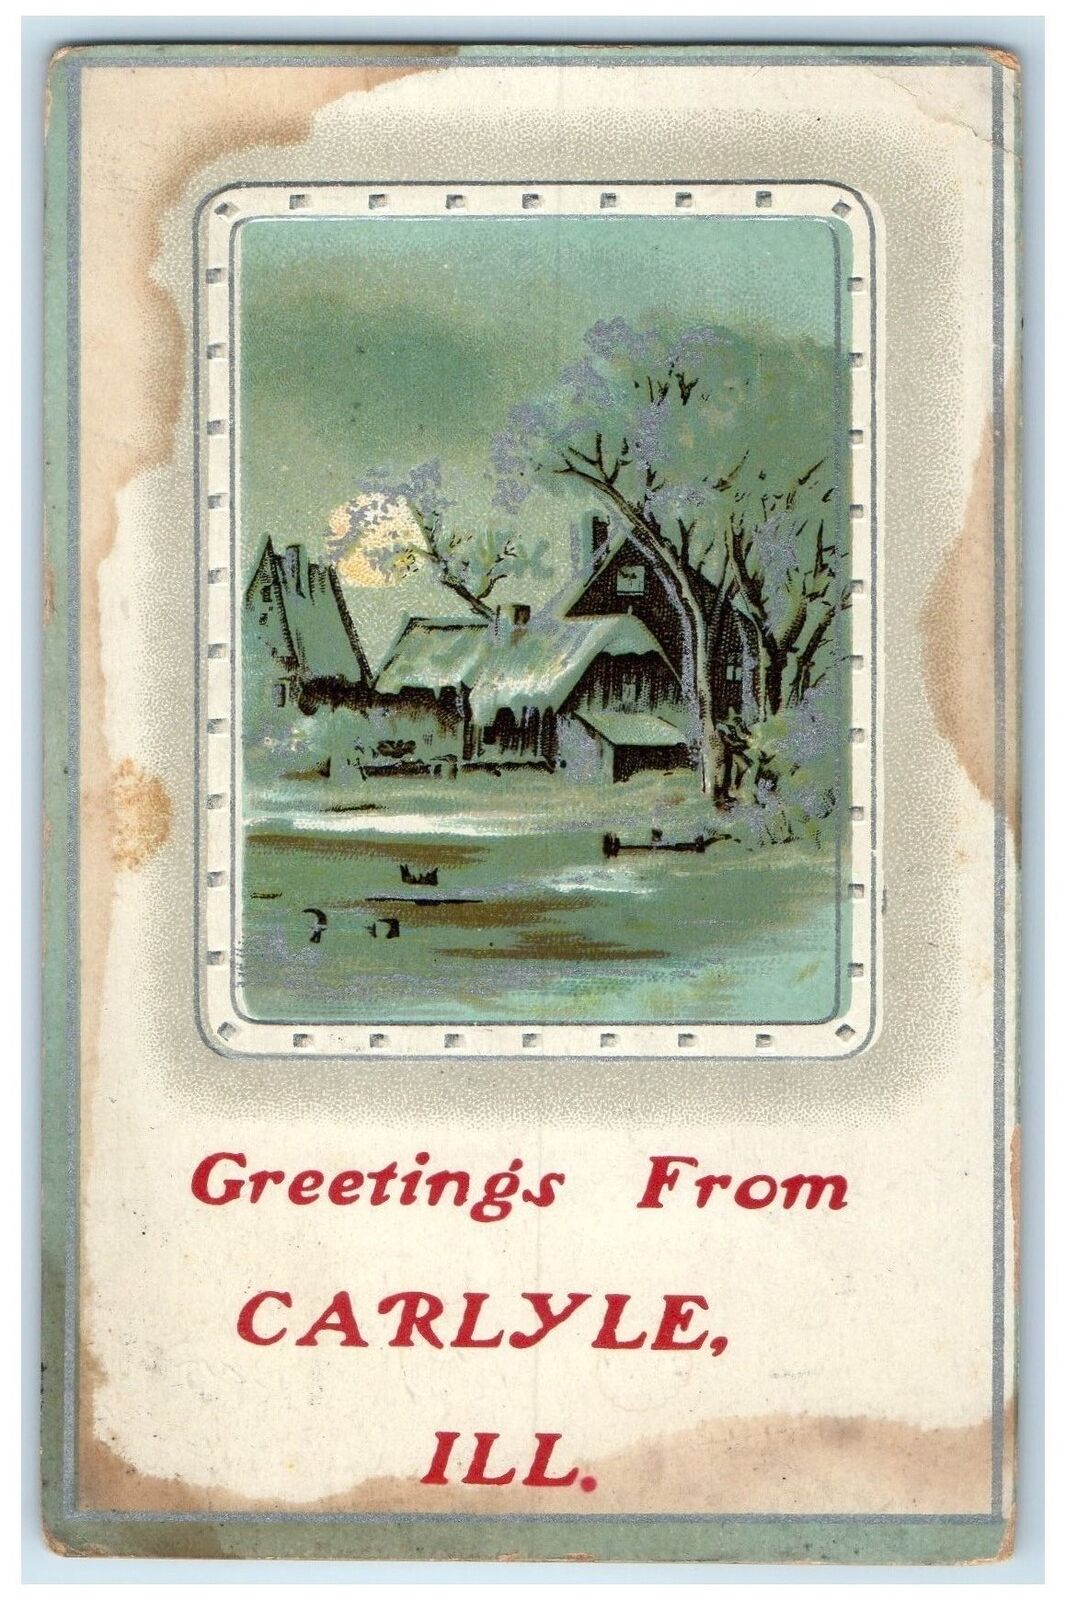 1911 Greetings From Carlyle Illinois IL Posted Embossed Houses Trees Postcard